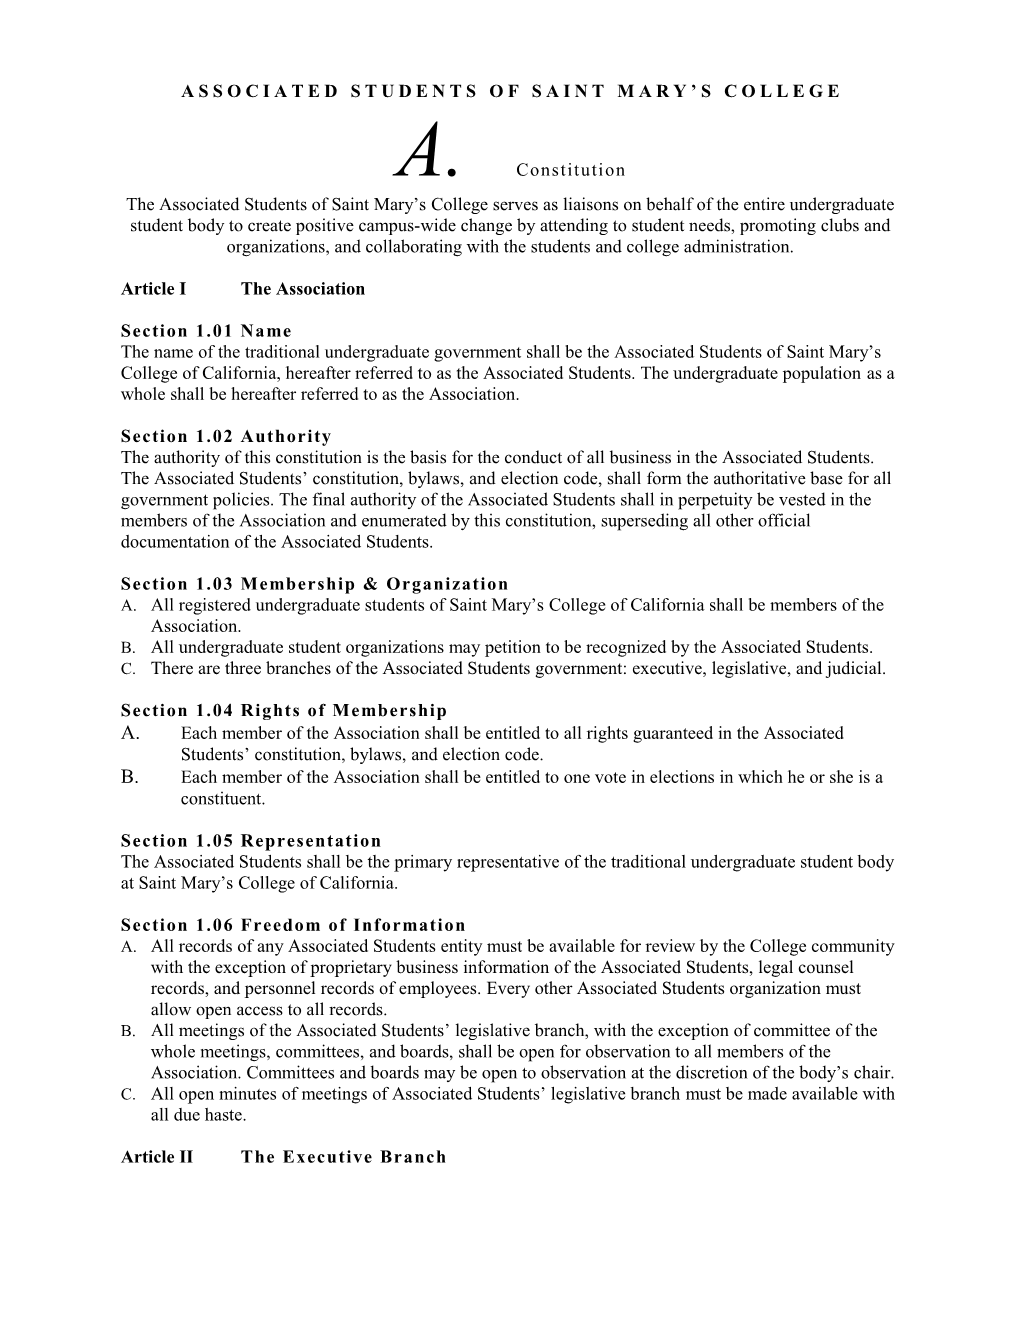 Constitution of the Associated Students of Saint Mary S College1